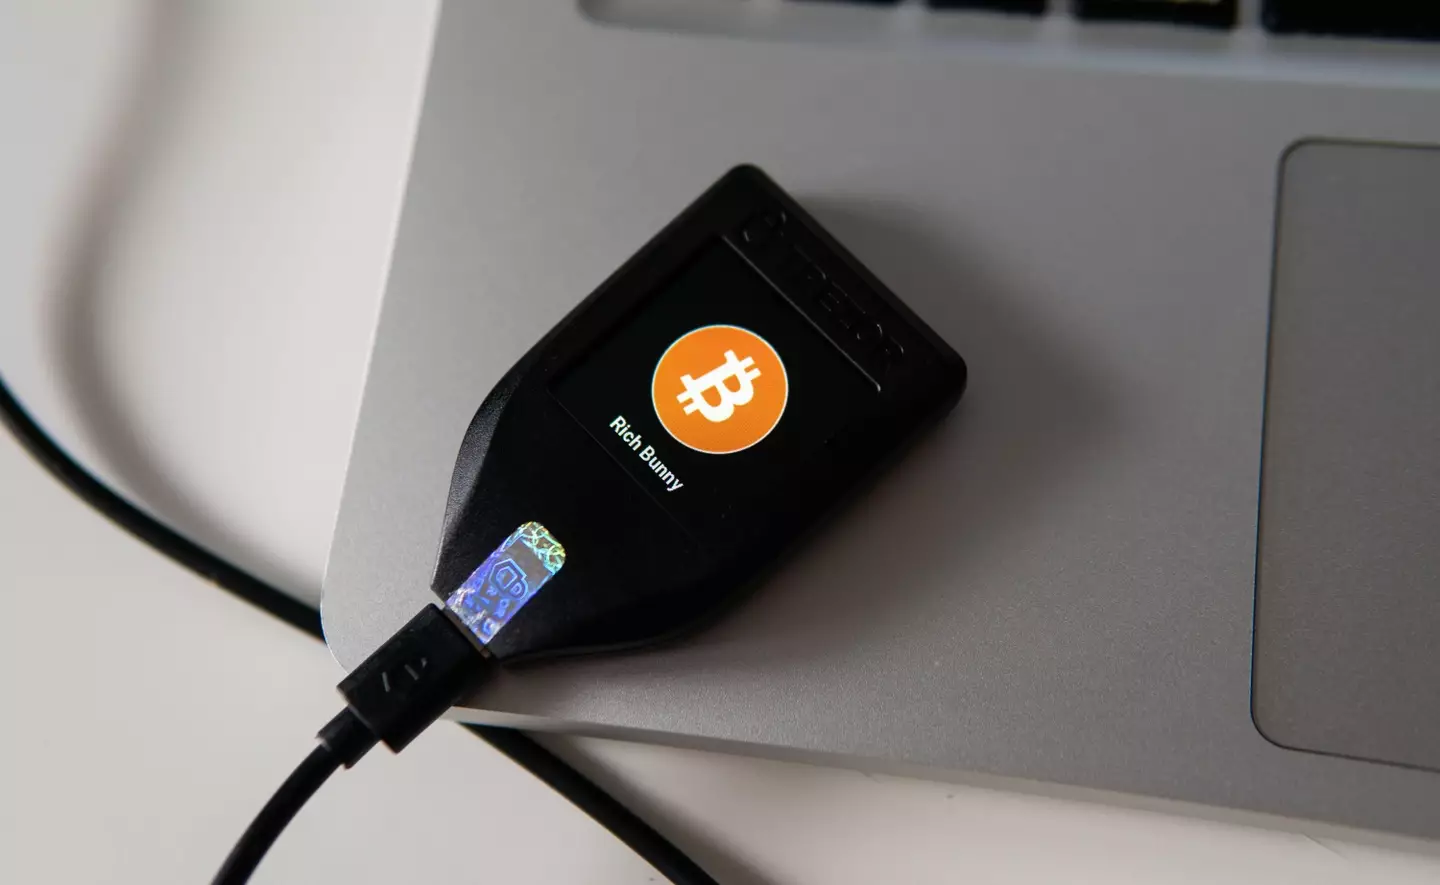 Court filings claim Gary took control of the Bitcoin on Larry's Trezor device from another device.